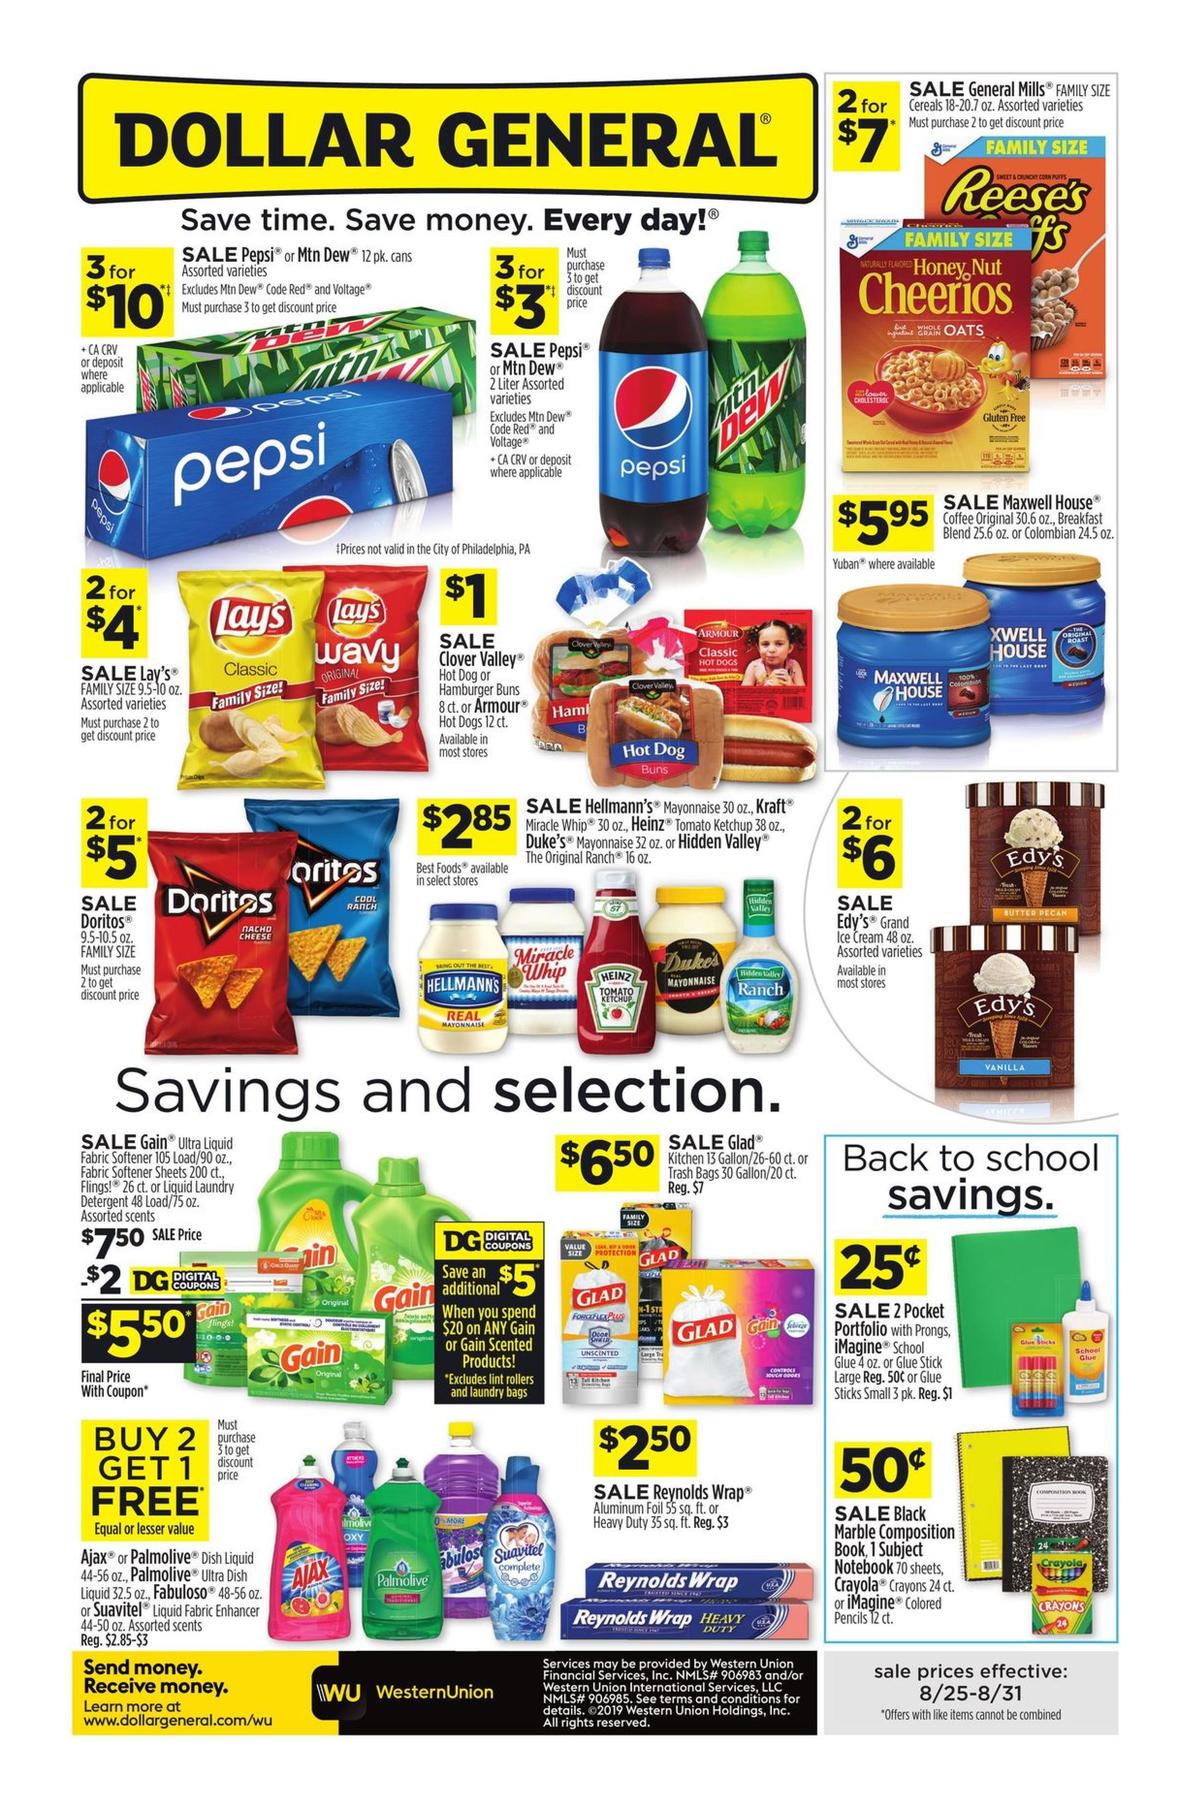 Dollar General Weekly Ad from August 25